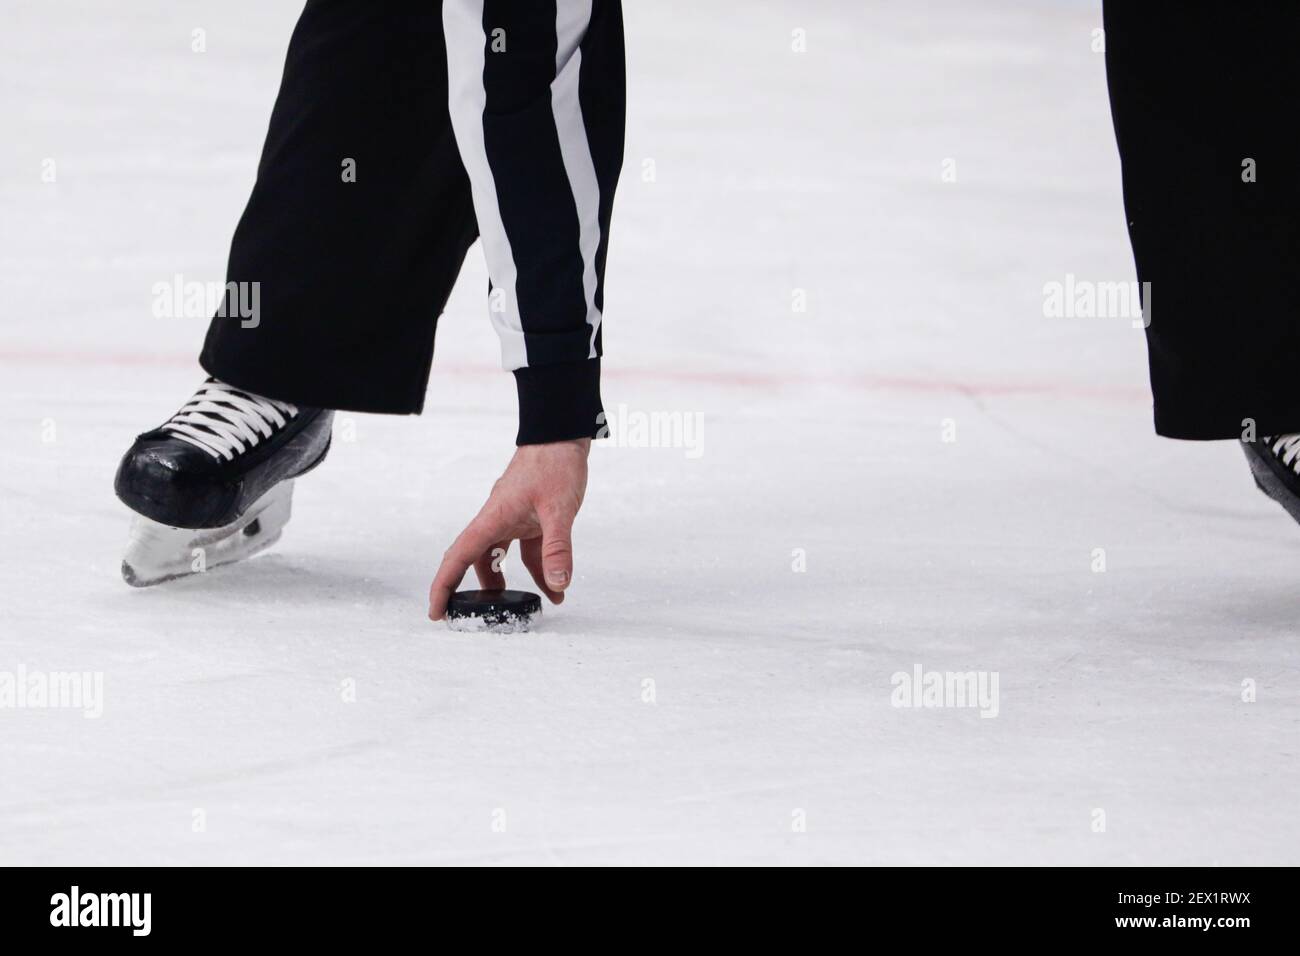 Moscow, Russia. 3rd March, 2021. KHL Regular Season ice hockey match: CSKA Moscow Vs Spartak Moscow - Moscow CSKA Arena. Hockey disk and linesman. Stock Photo